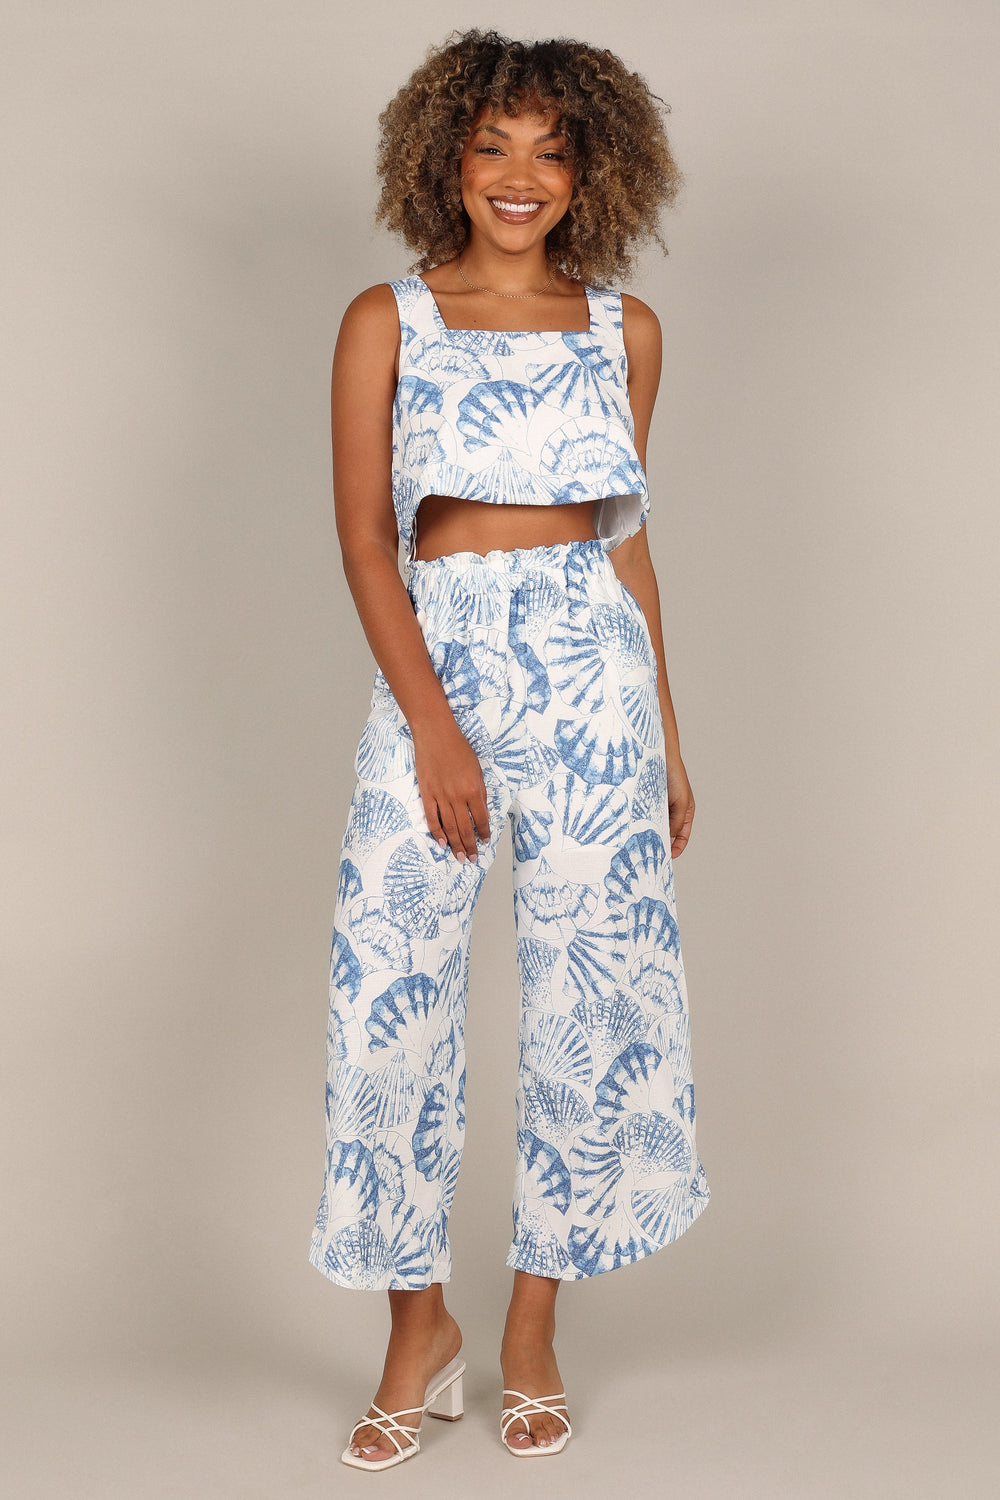 TOPS @Ellidy Cropped Top - Blue Print